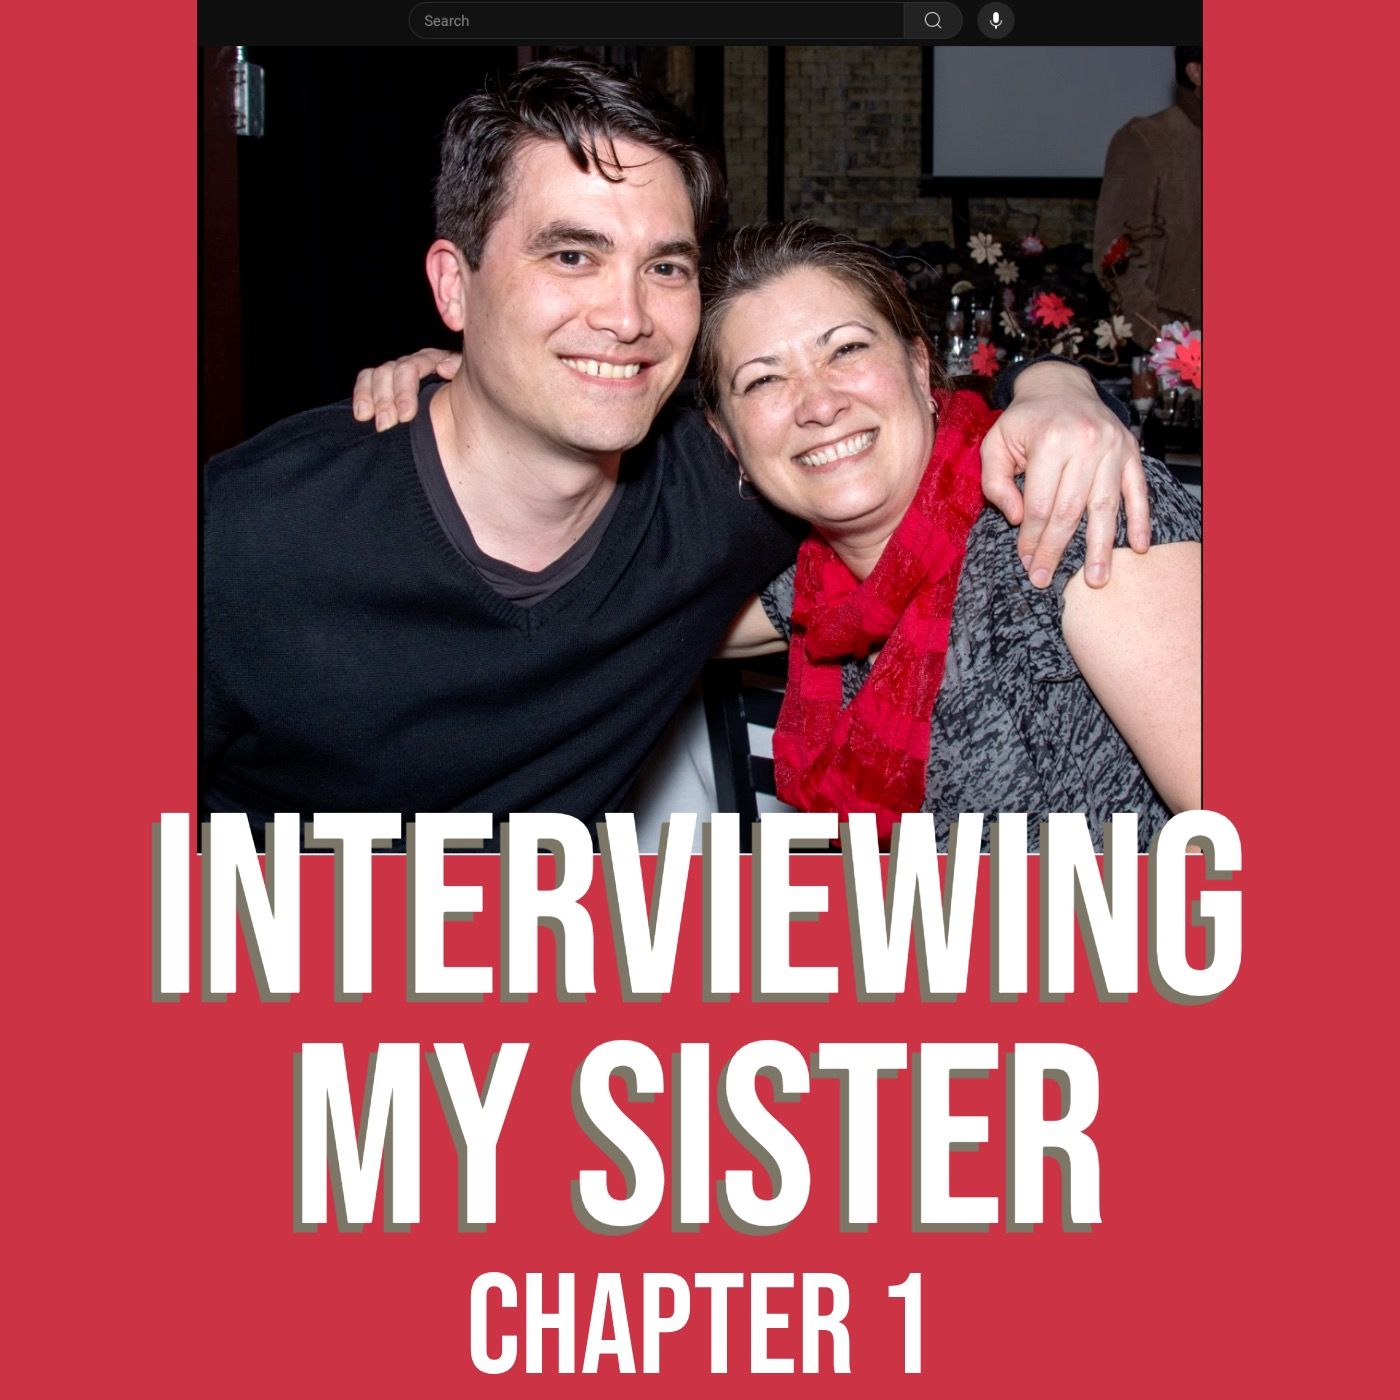 Interviewing My Sister (Chapter 1)